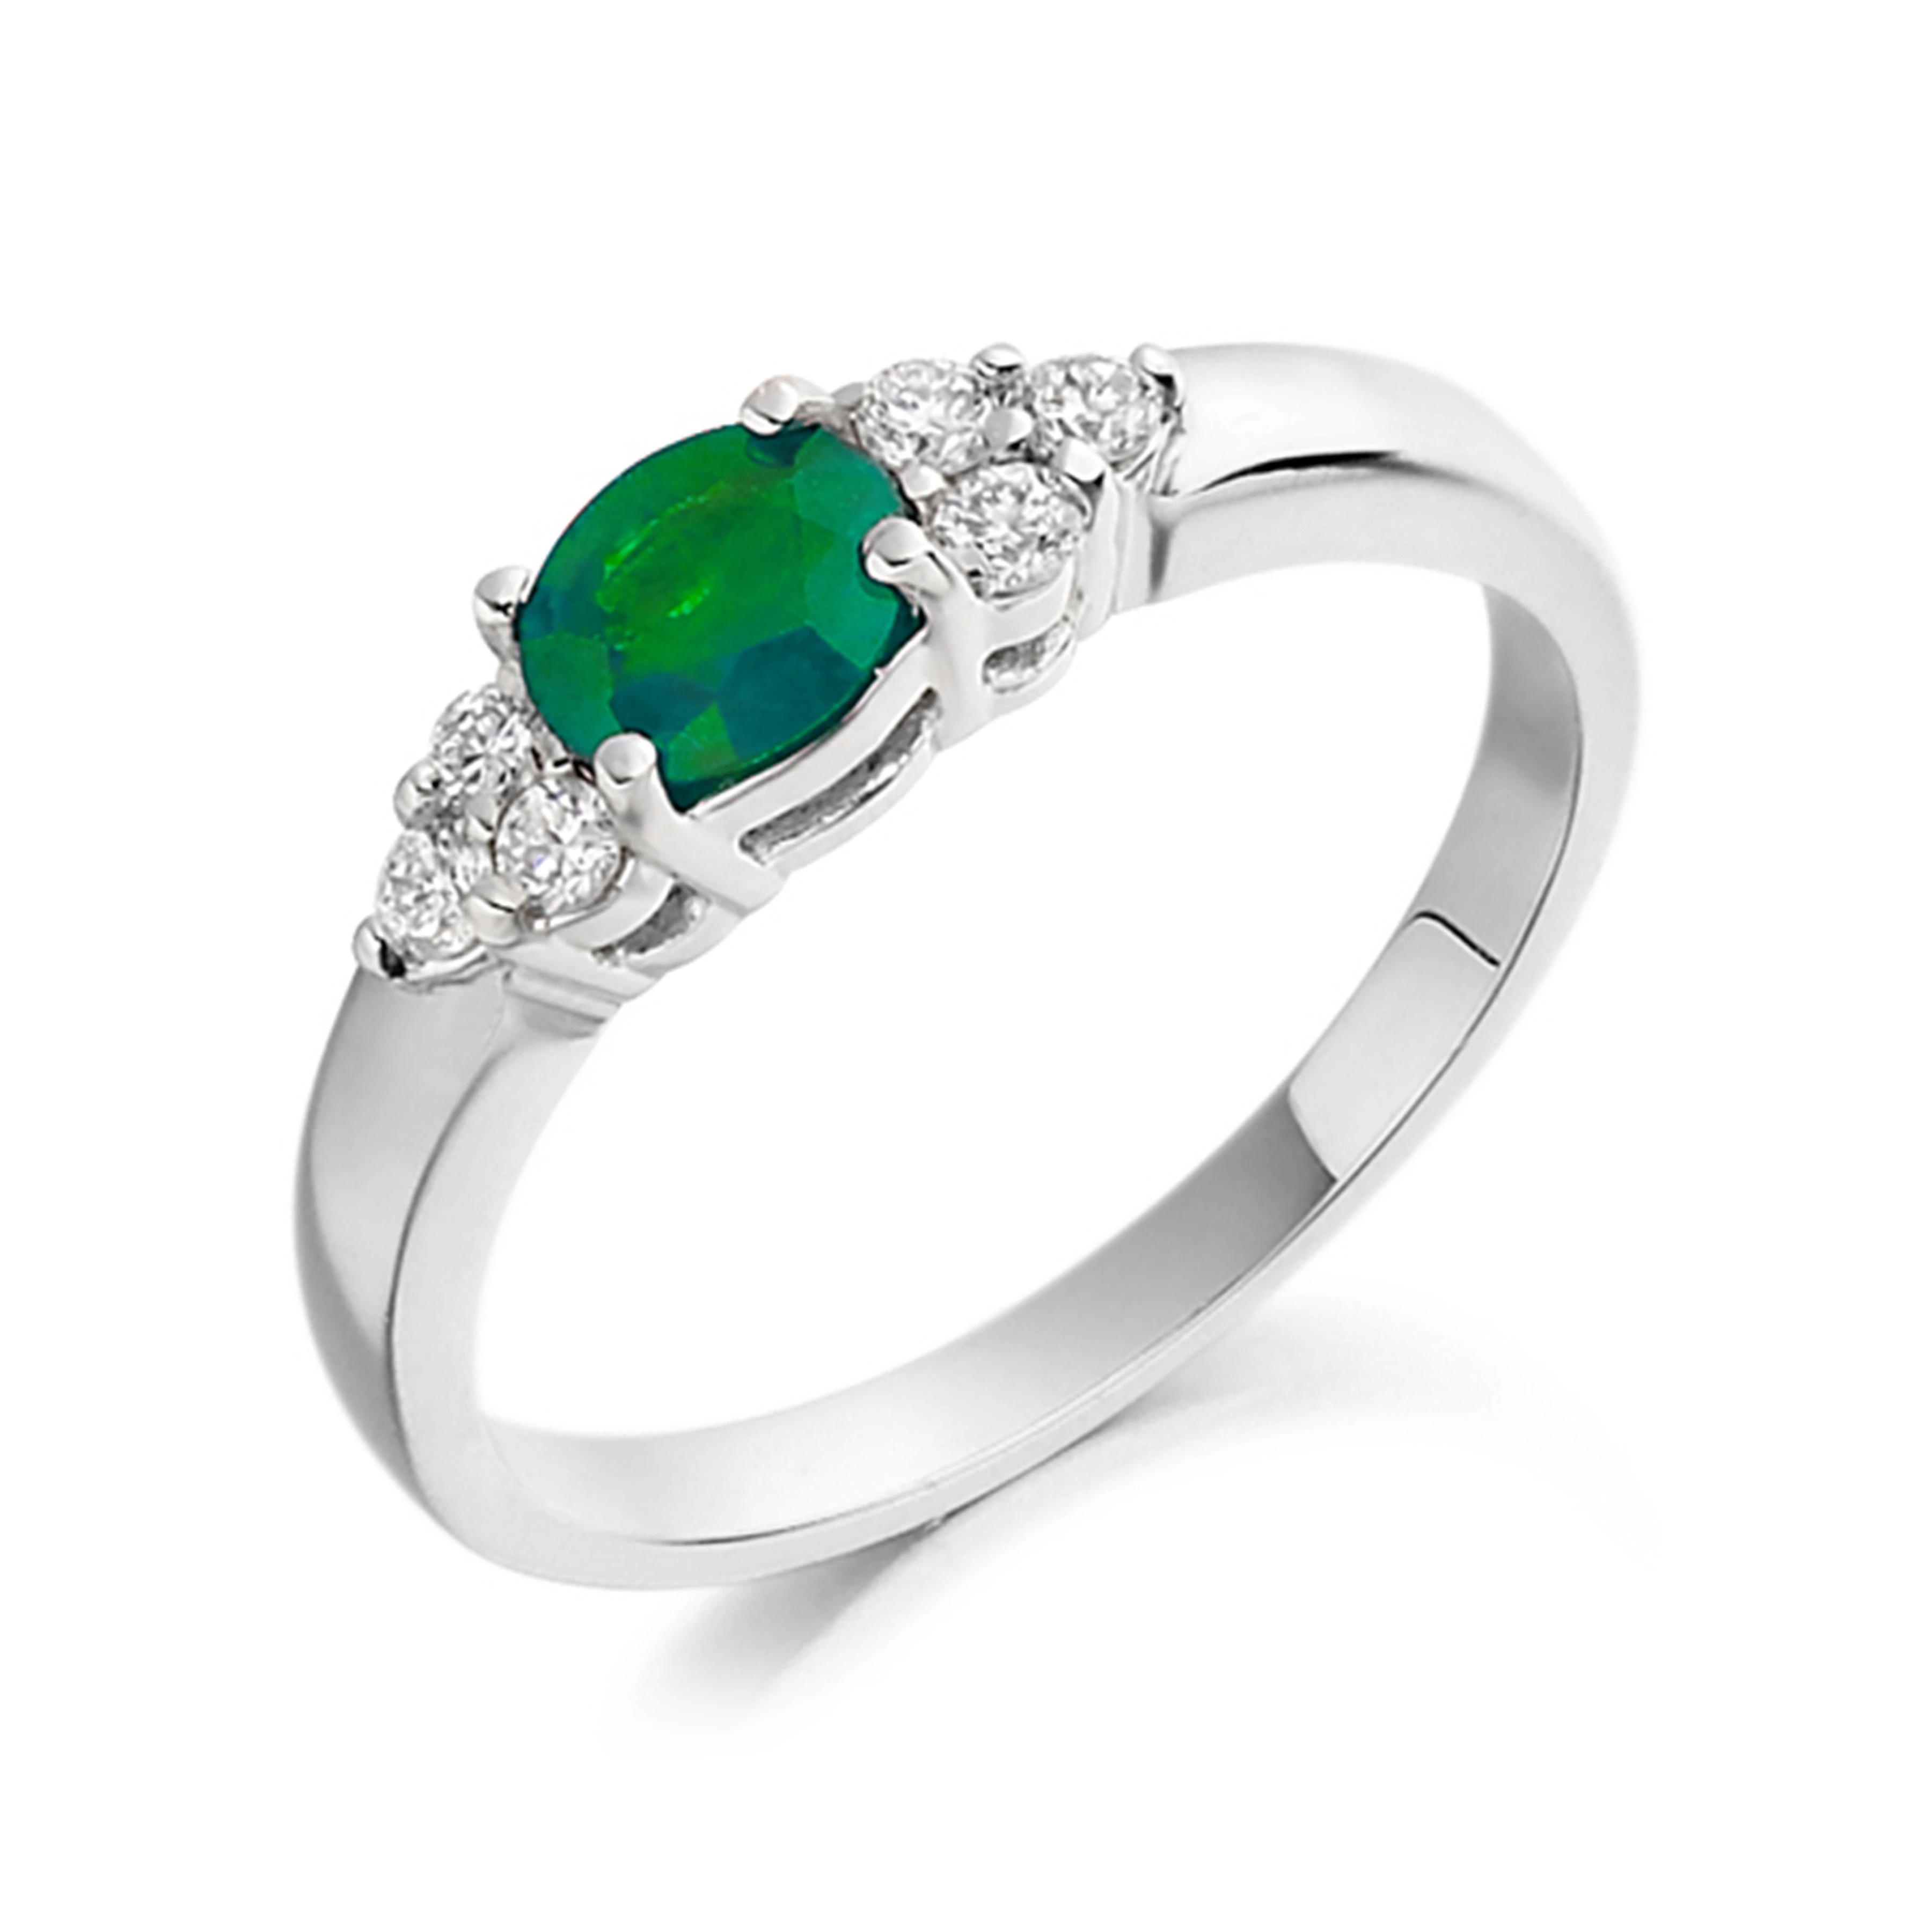 gemstone ring with oval shape emerald and side stone ring